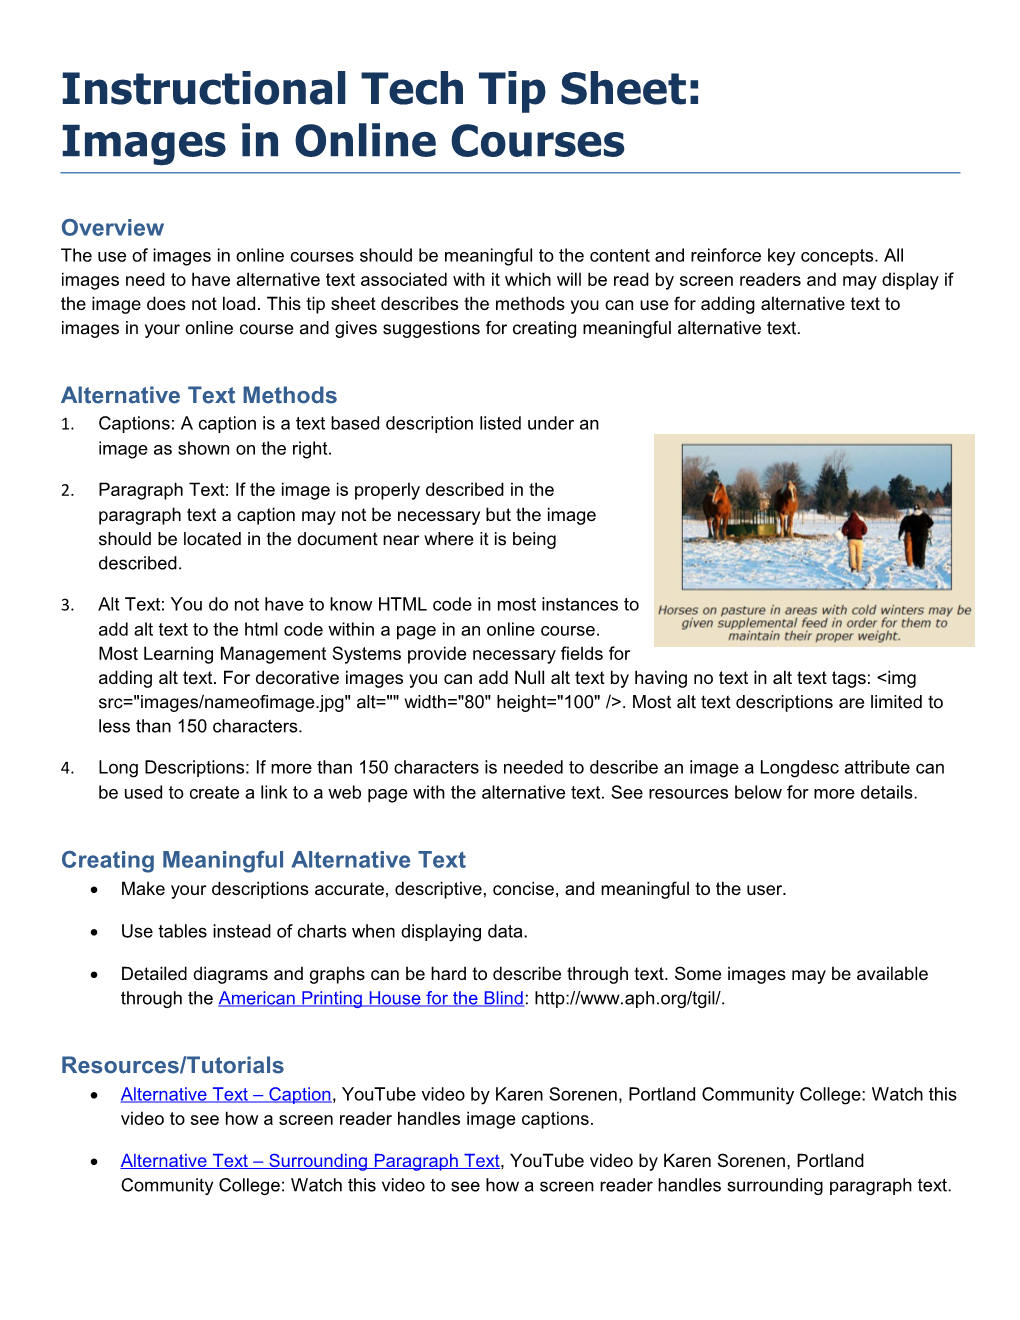 Instructional Tech Tip Sheet: Images in Online Courses